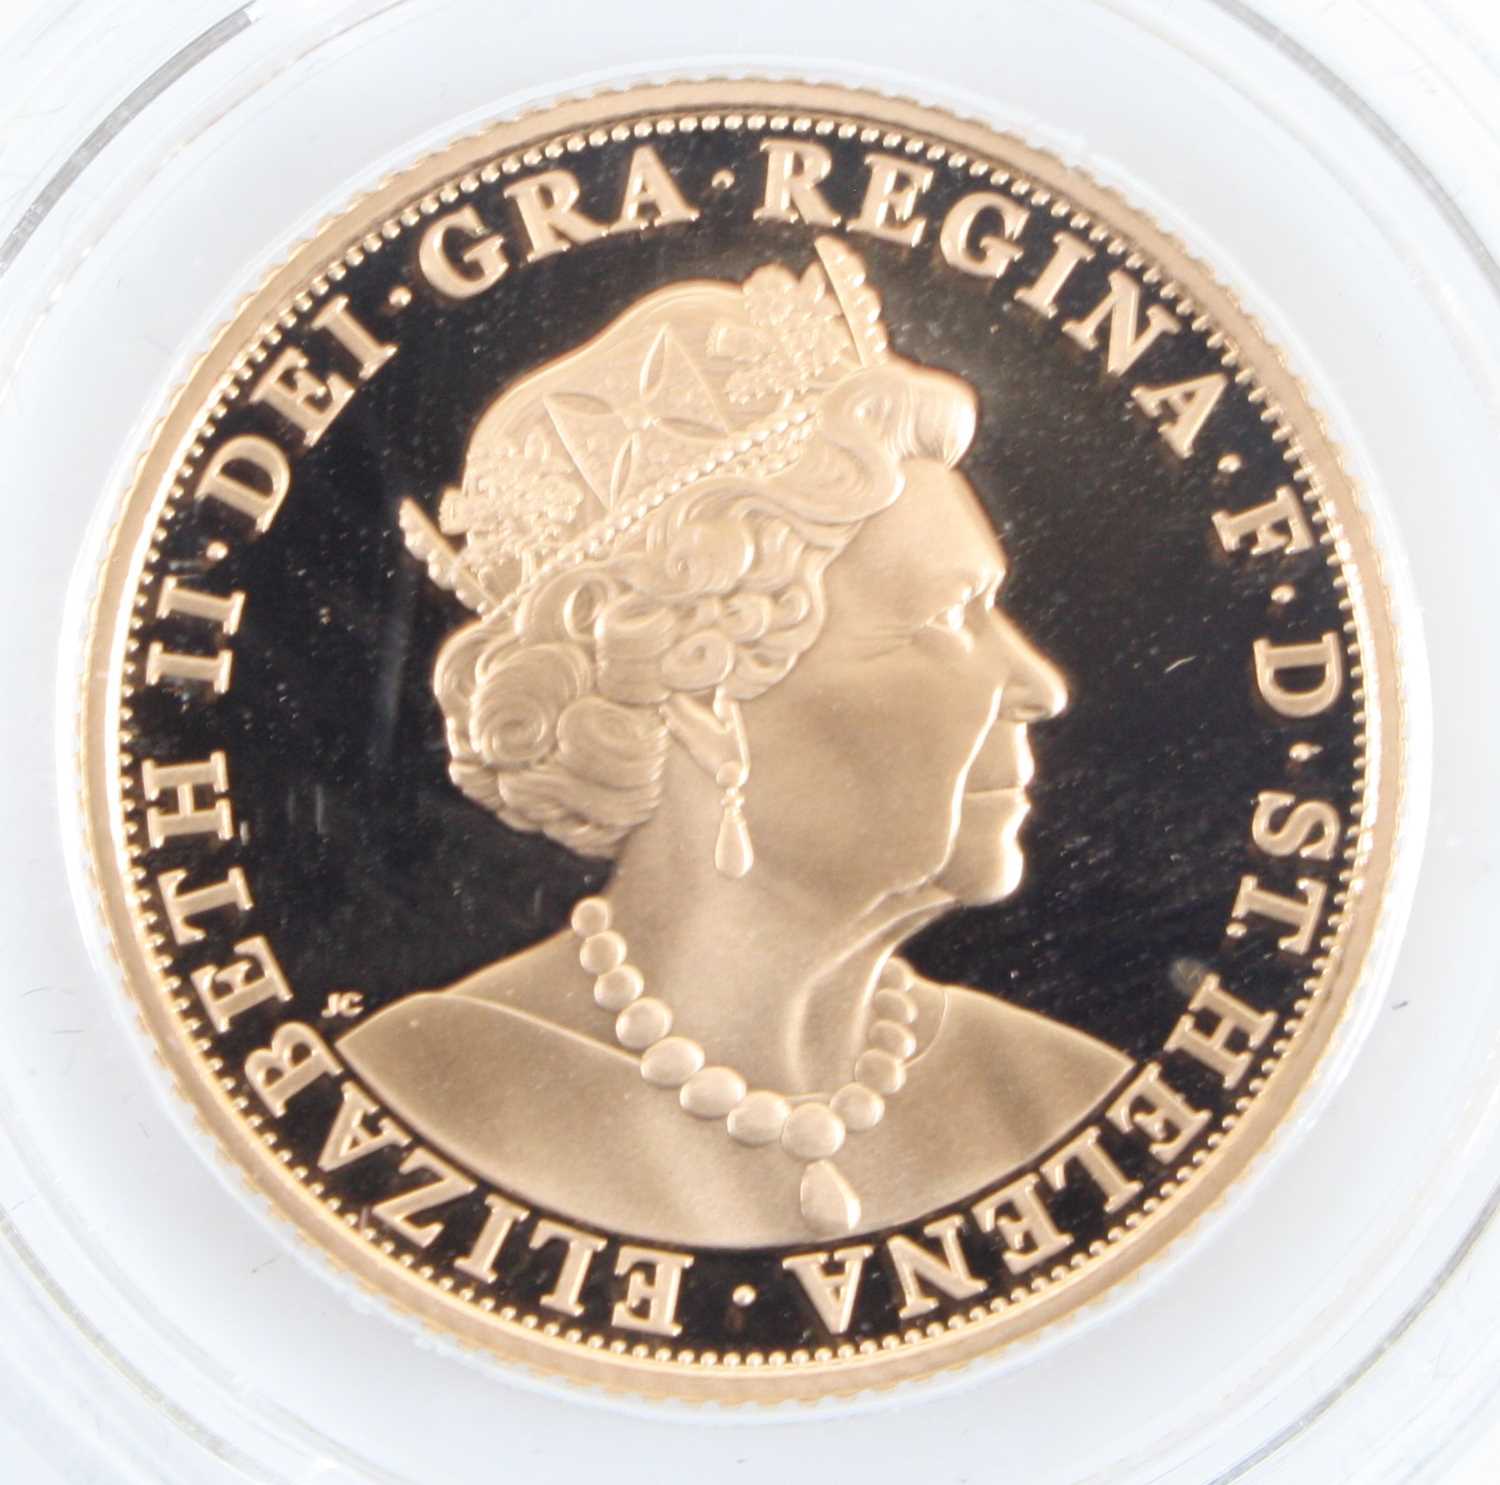 St Helena, East India Company, Queen Victoria 2019 Gold Proof Coin, obv: Elizabeth II, rev: - Image 2 of 3